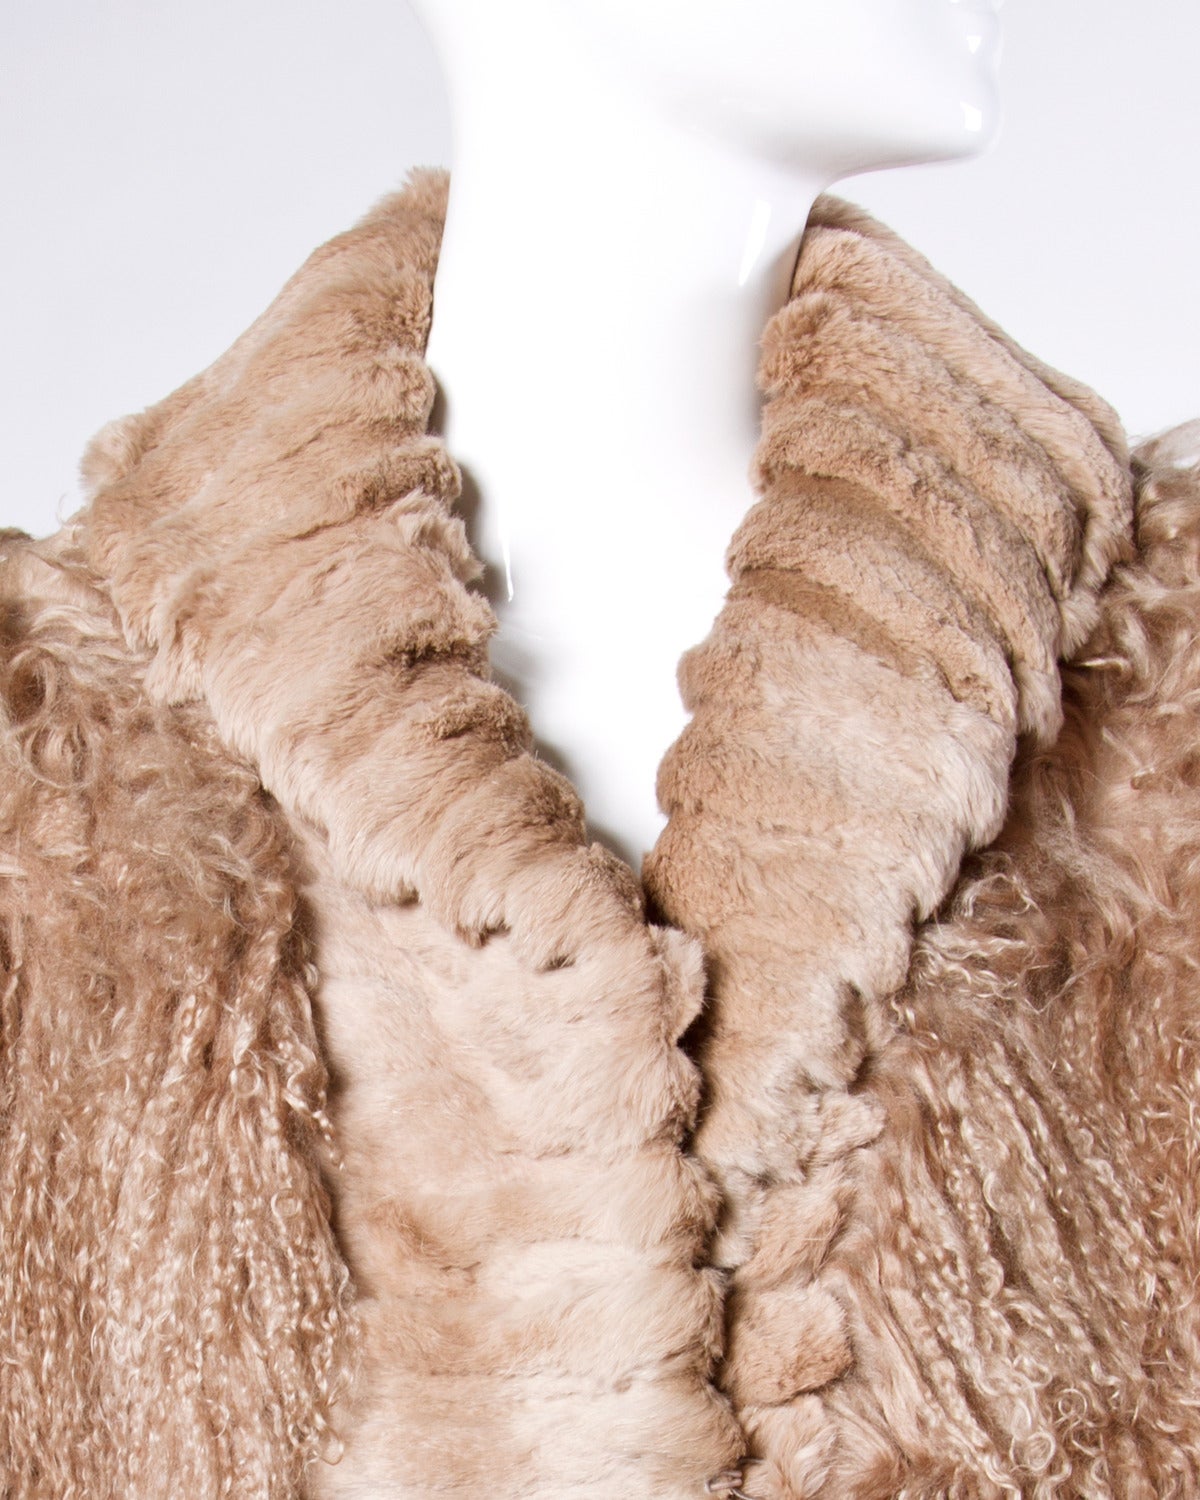 Dyed light brown Tibetan lamb fur coat with sheared rabbit fur trim.

Details:

Fully Lined
Front Pockets
Shoulder Pads Sewn Into Lining
Front Hook Closure
Marked Size: XL
Estimated Size: M-XL
Fabric: Genuine Dyed Tibet Lamb/ Sheared